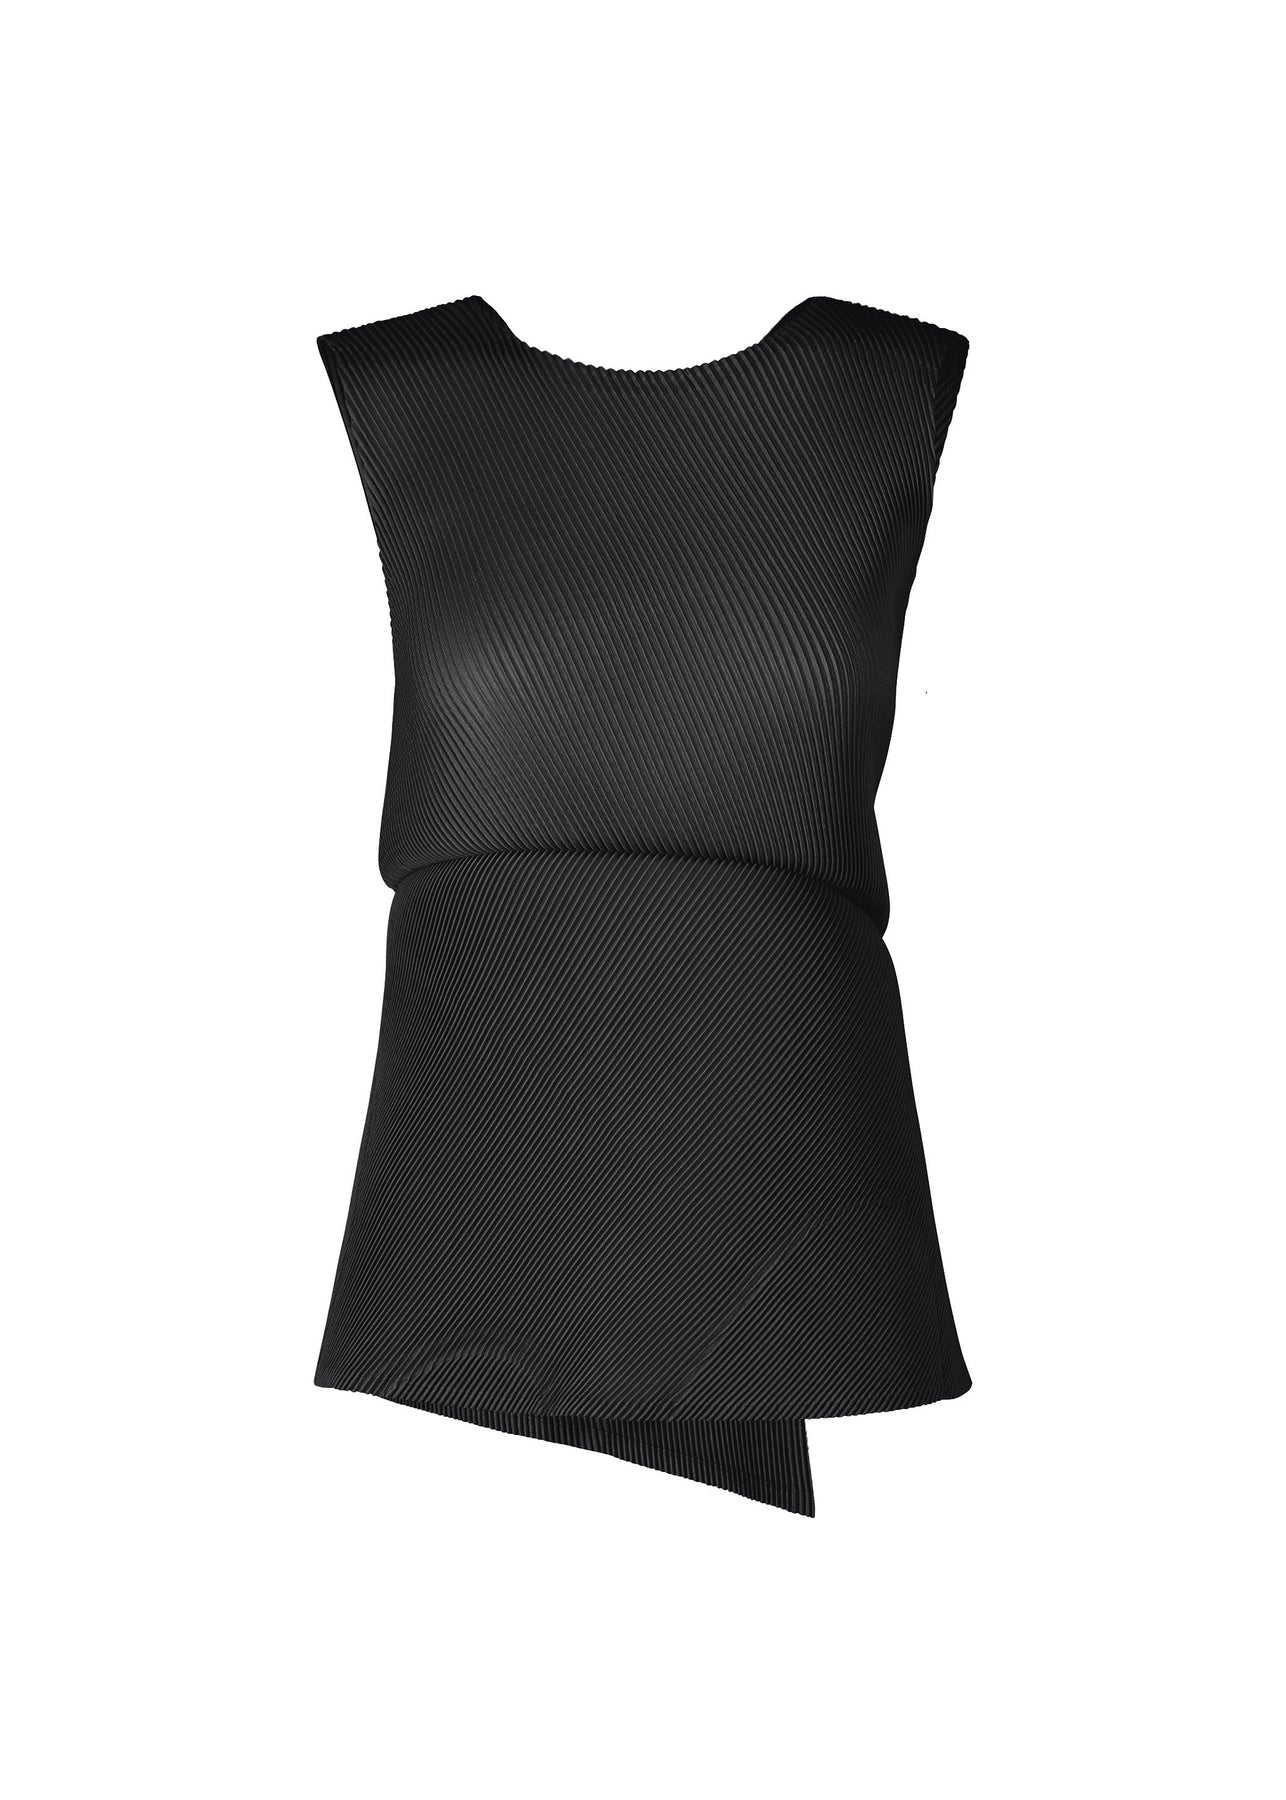 LEATHER LIKE PLEATS TOP | The official ISSEY MIYAKE ONLINE STORE 